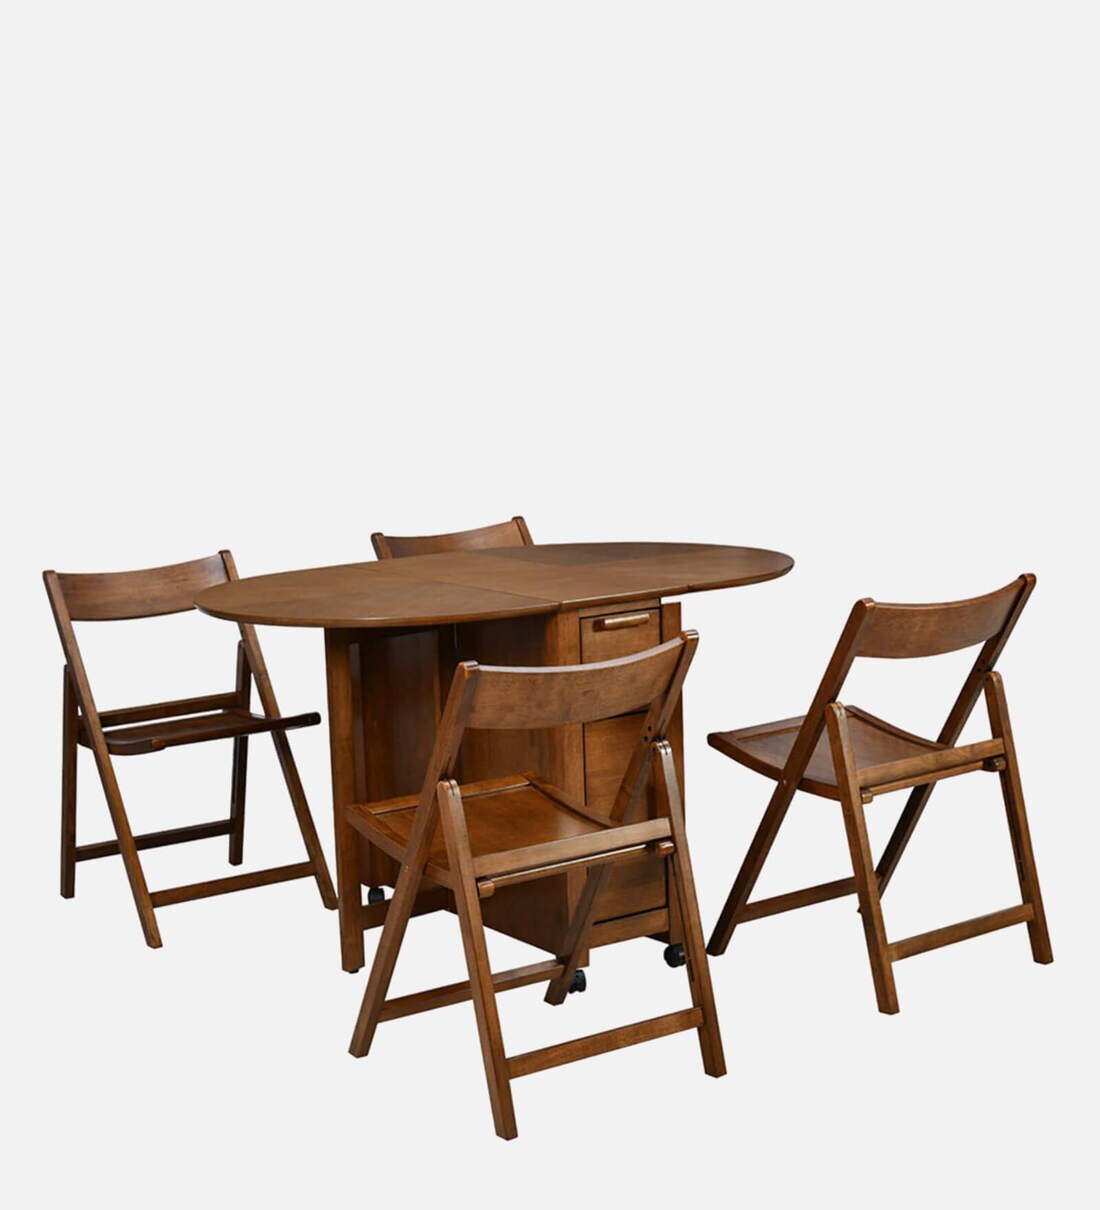 Carven Foaldable 4 Seater Dining Set In Walnut Finish